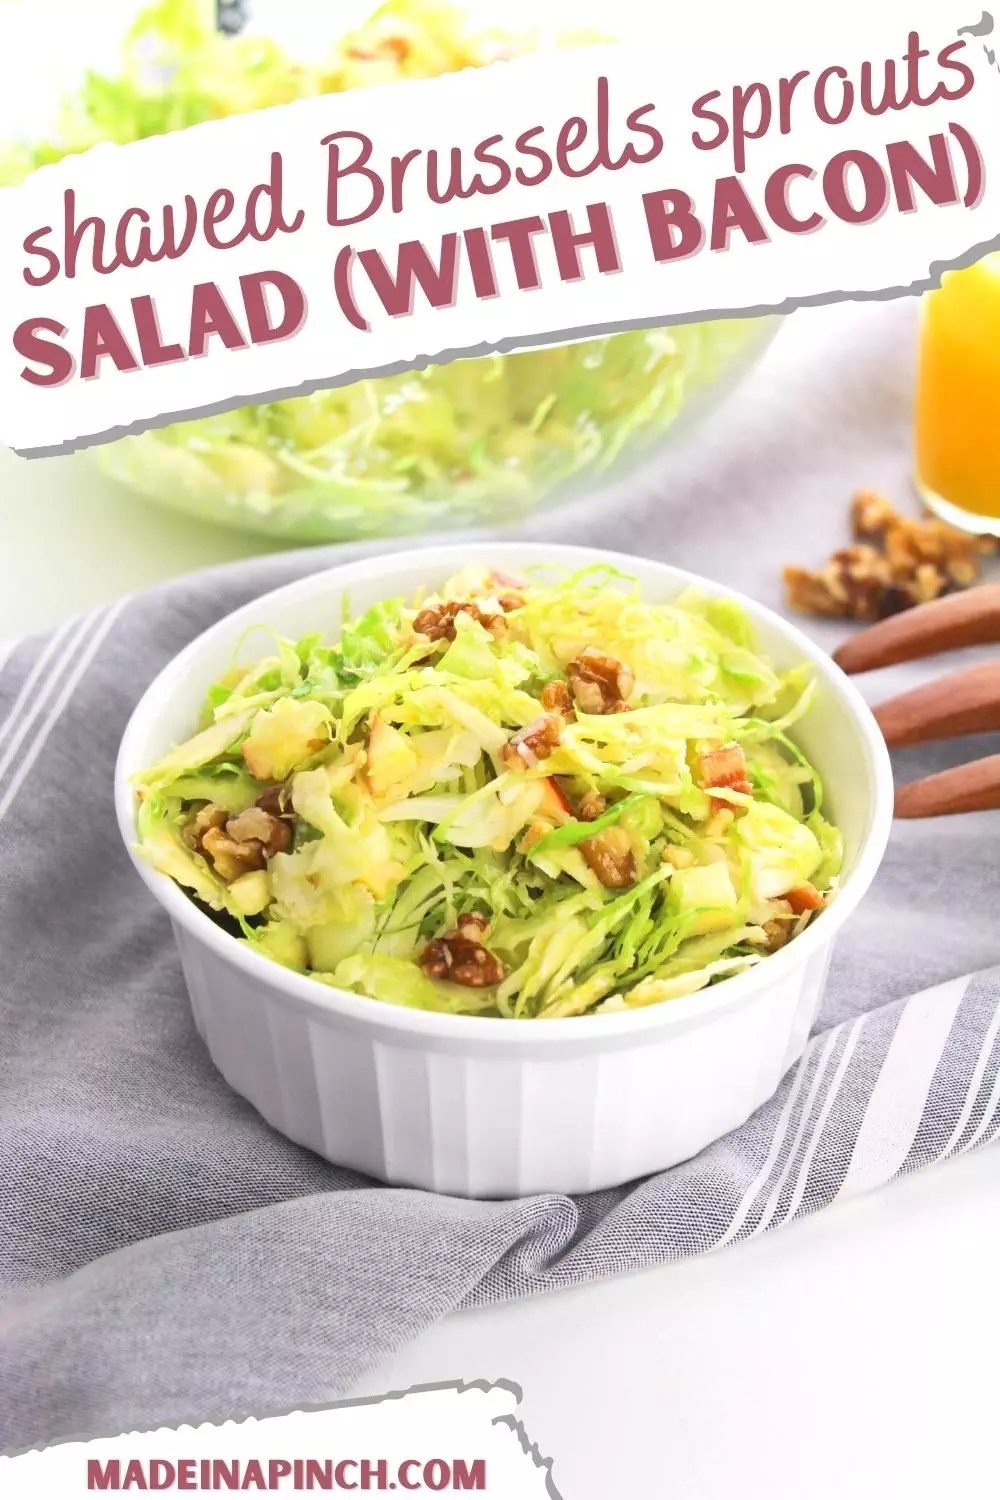 shaved brussels sprouts salad with bacon pin